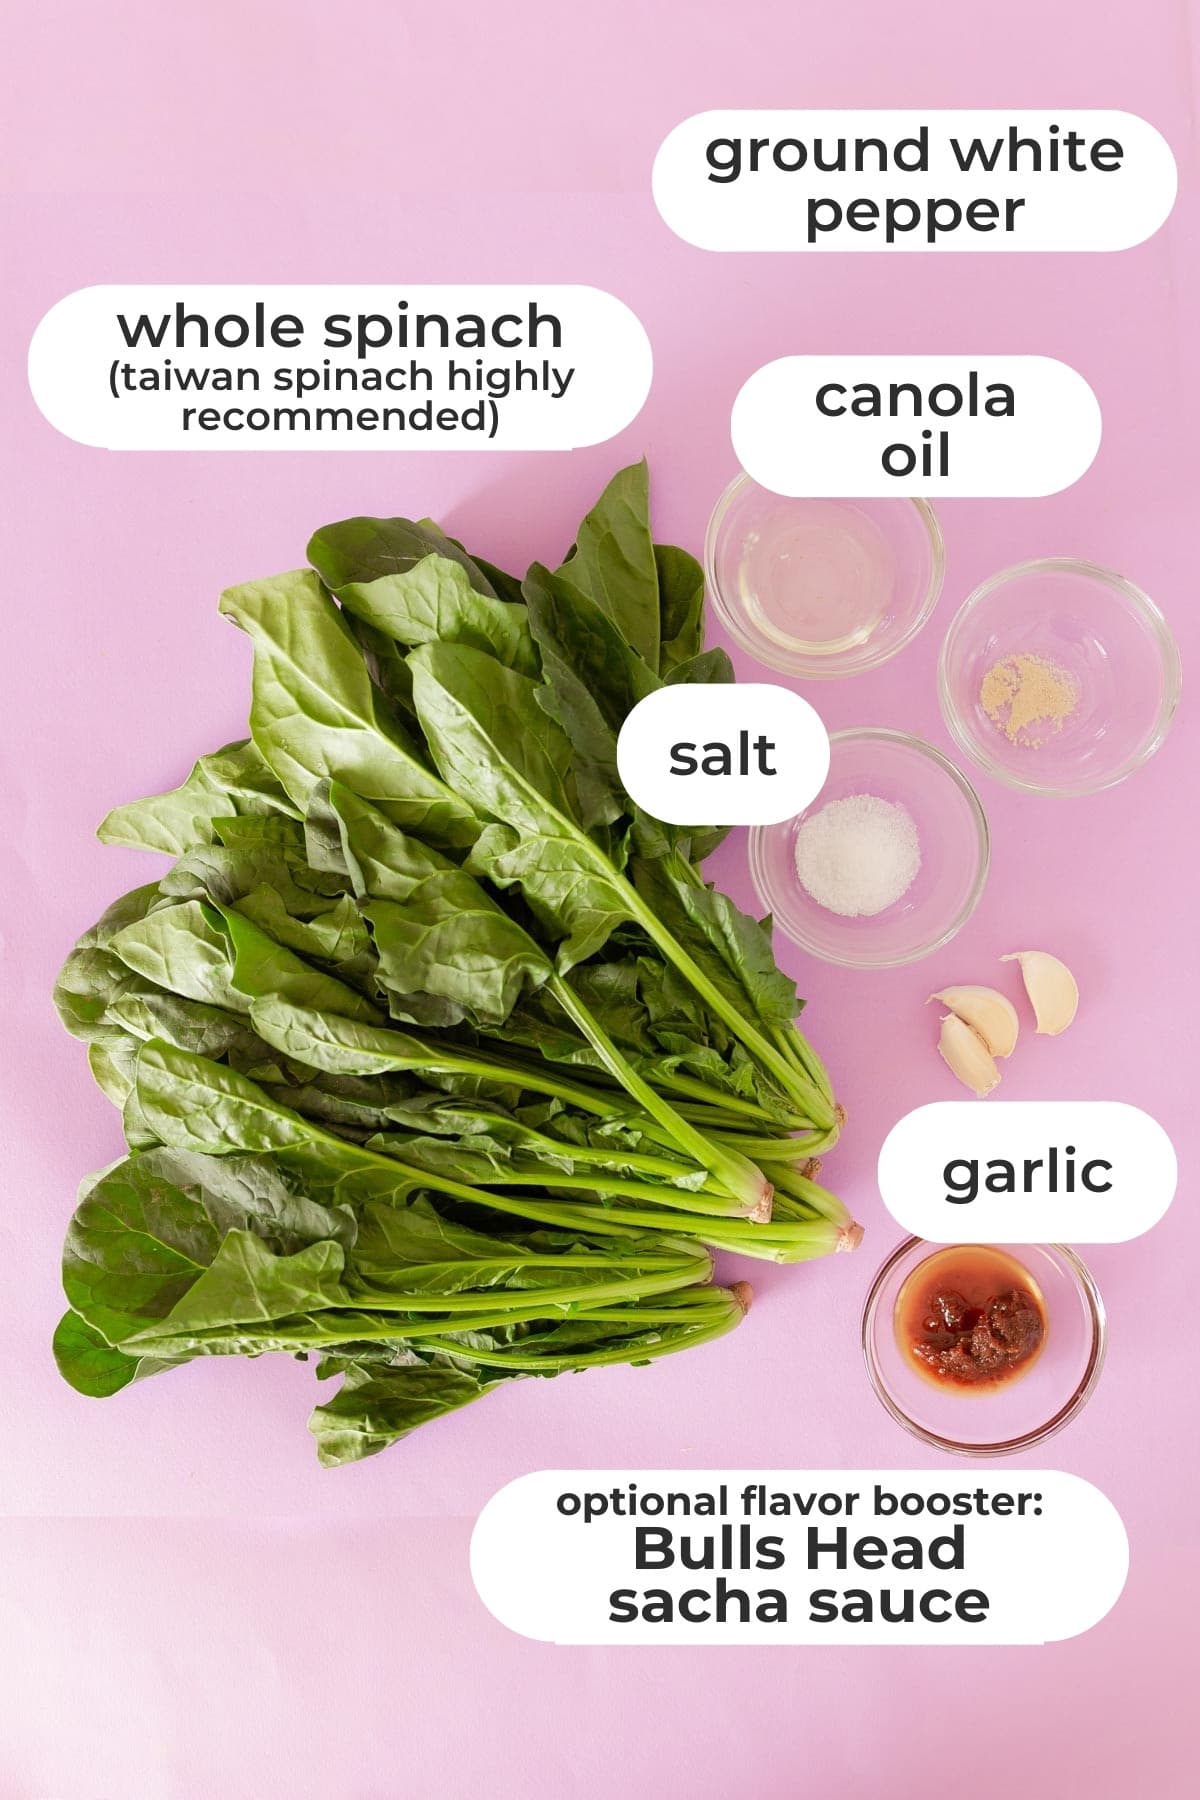 Labeled ingredients for stir-fry spinach over a purple background, including a large bunch of whole spinach ("taiwan spinach highly recommended"), canola oil, salt, ground white pepper, garlic, and an optional flavor booster: Bulls Head sacha sauce.